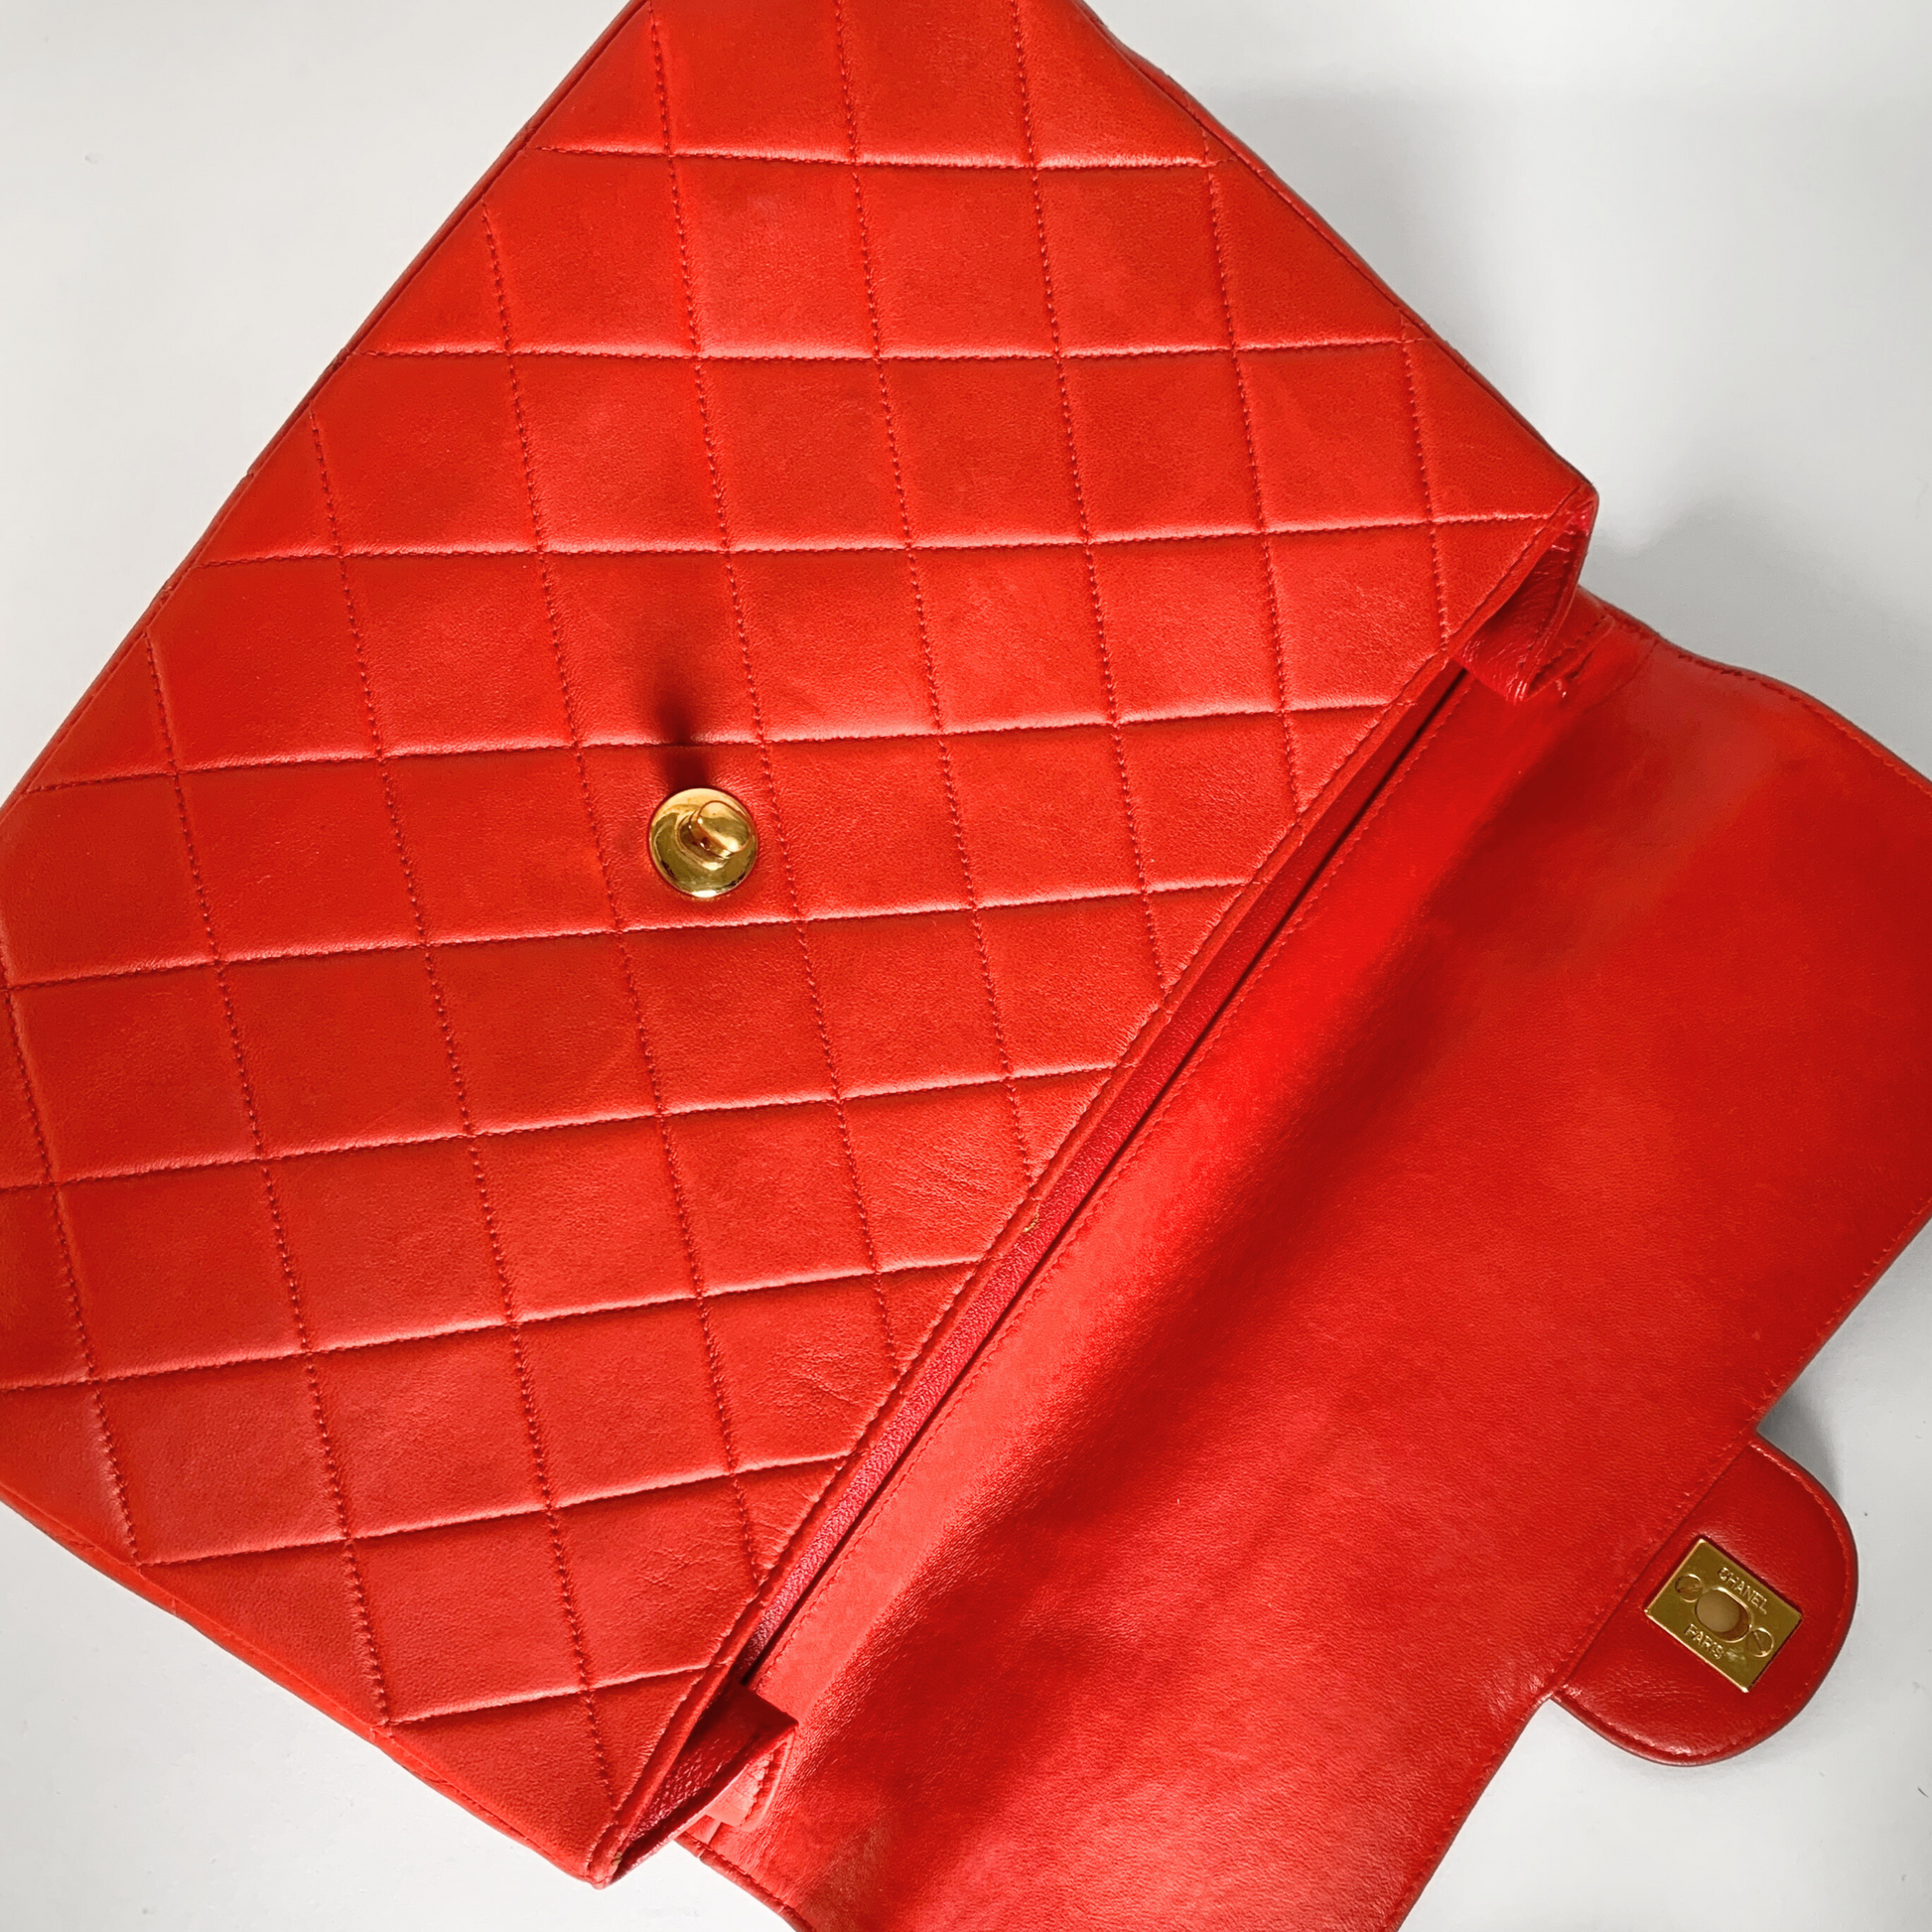 Chanel Chanel Red Maxi Classic Flapbag Double (Limited Edition) - Shoulder bags - Etoile Luxury Vintage